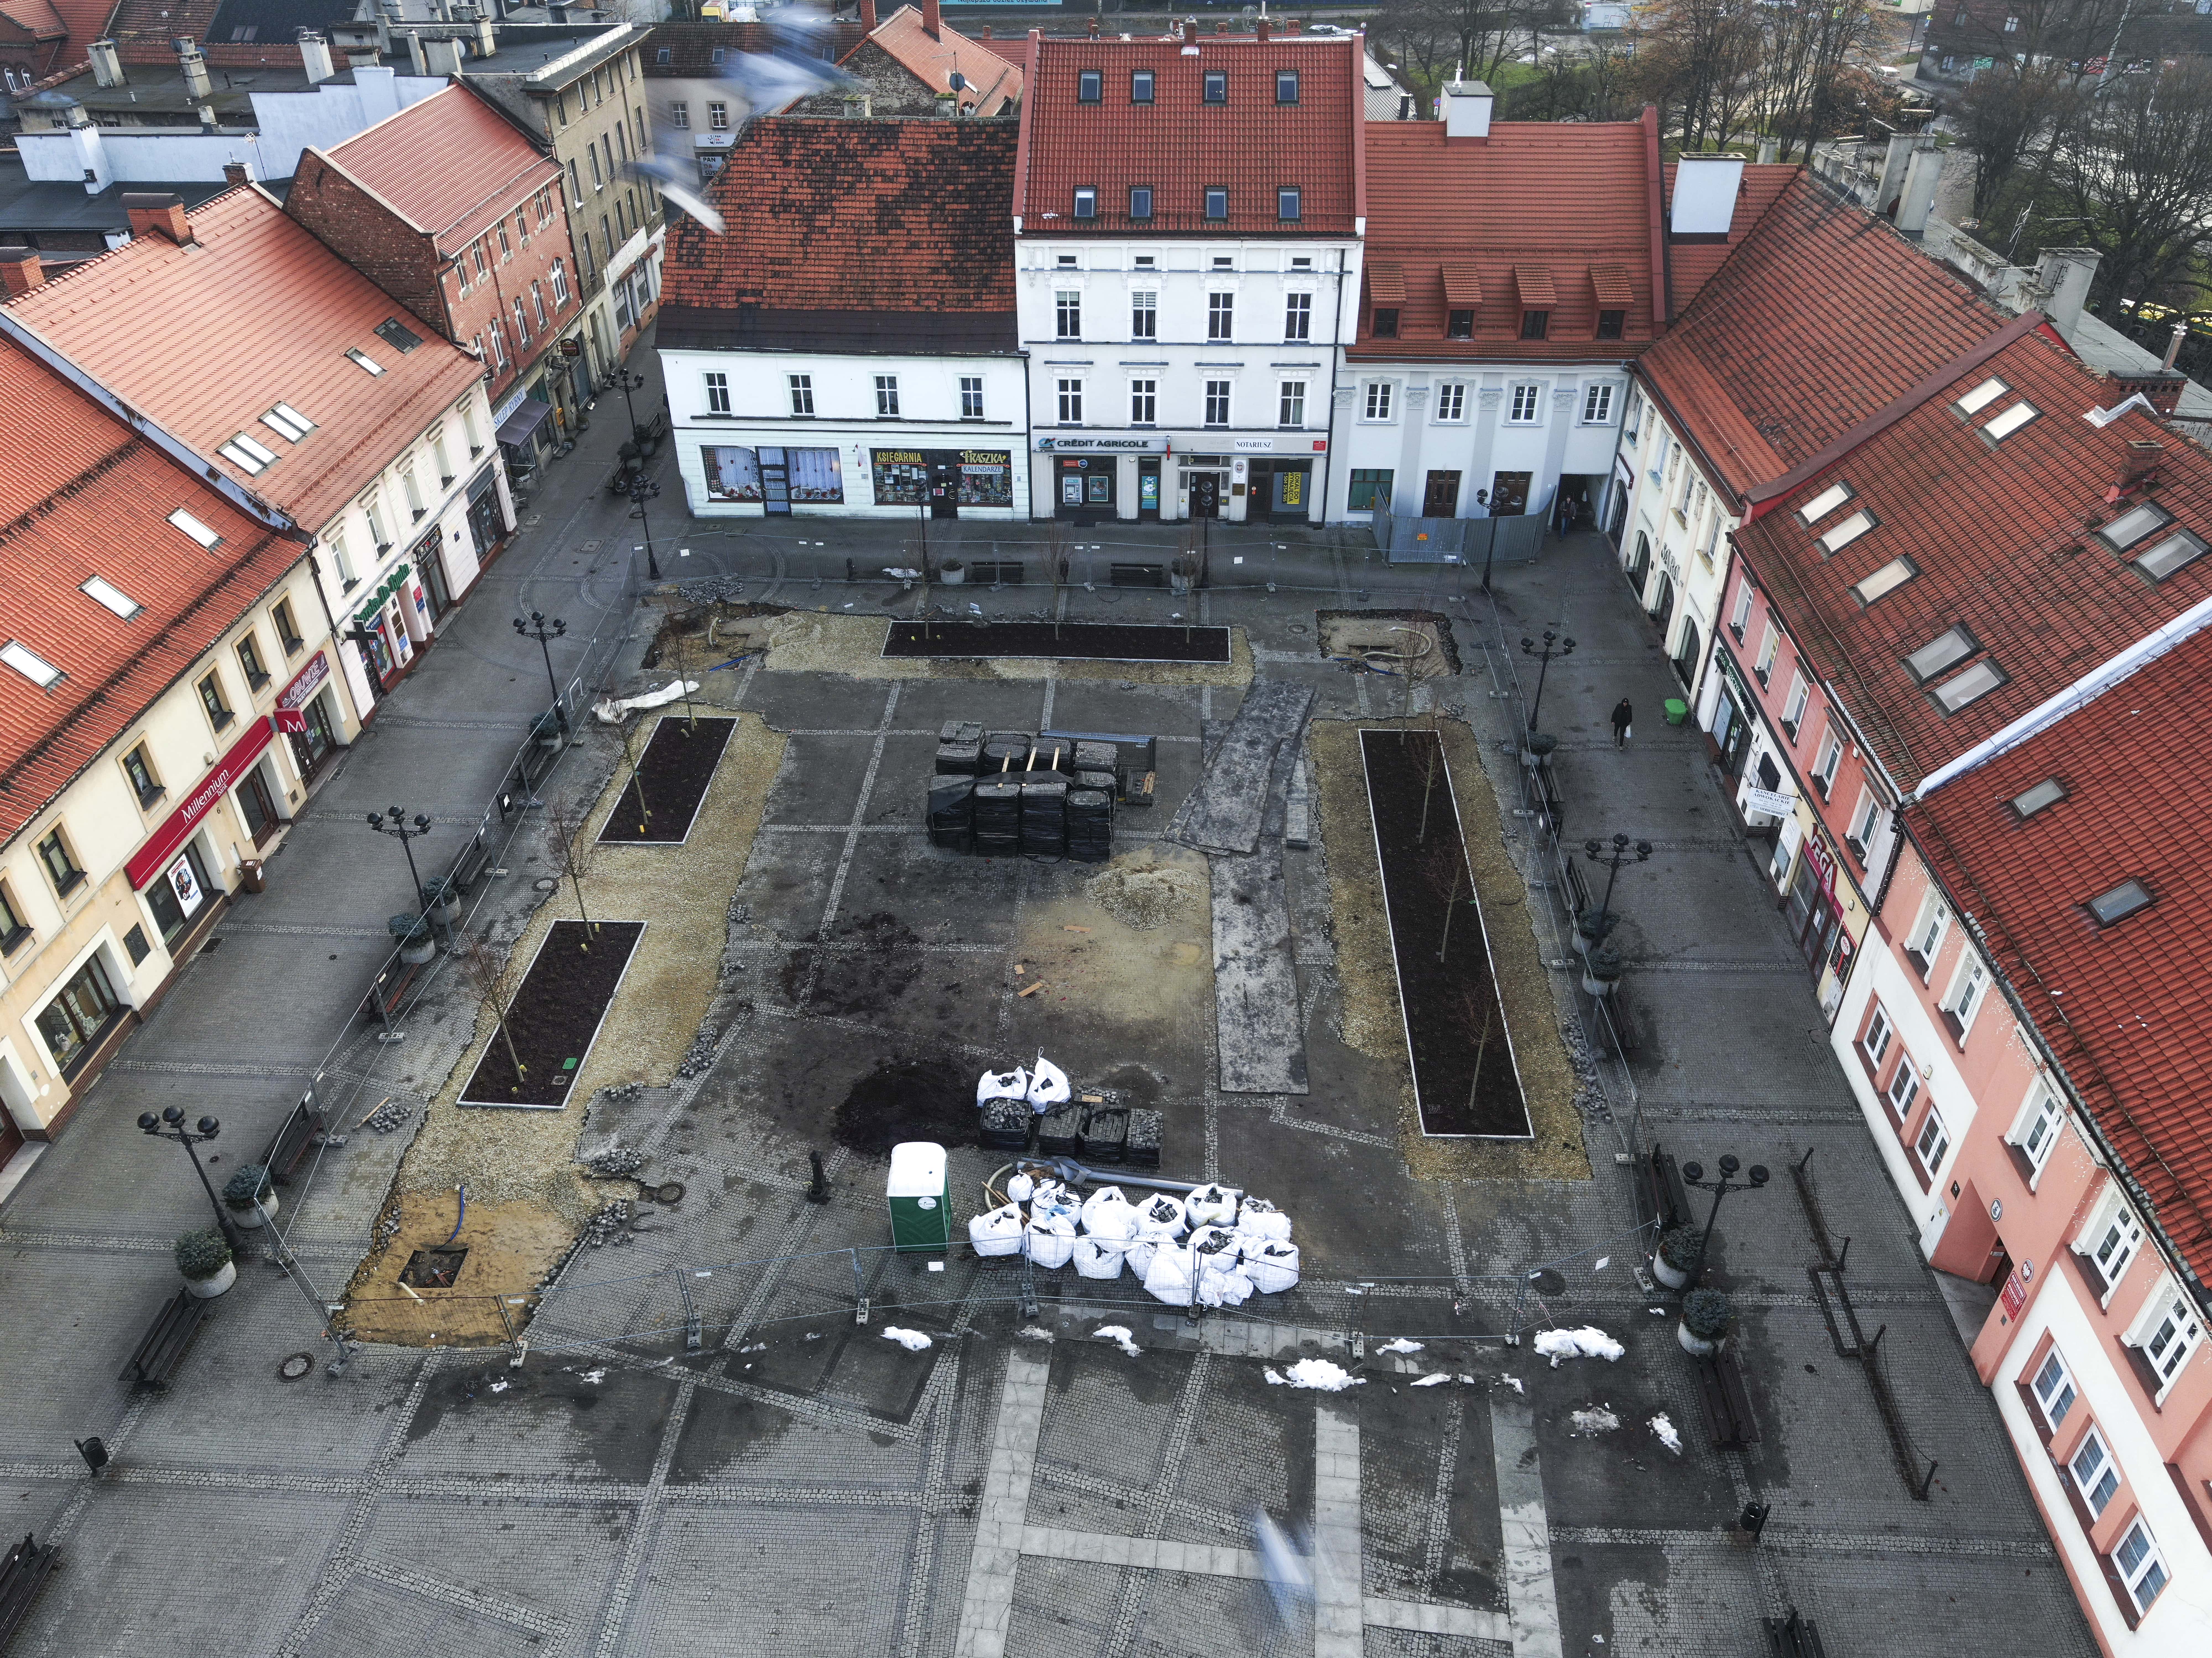 New trees planted in the market square. ©Silesian Botanical Garden